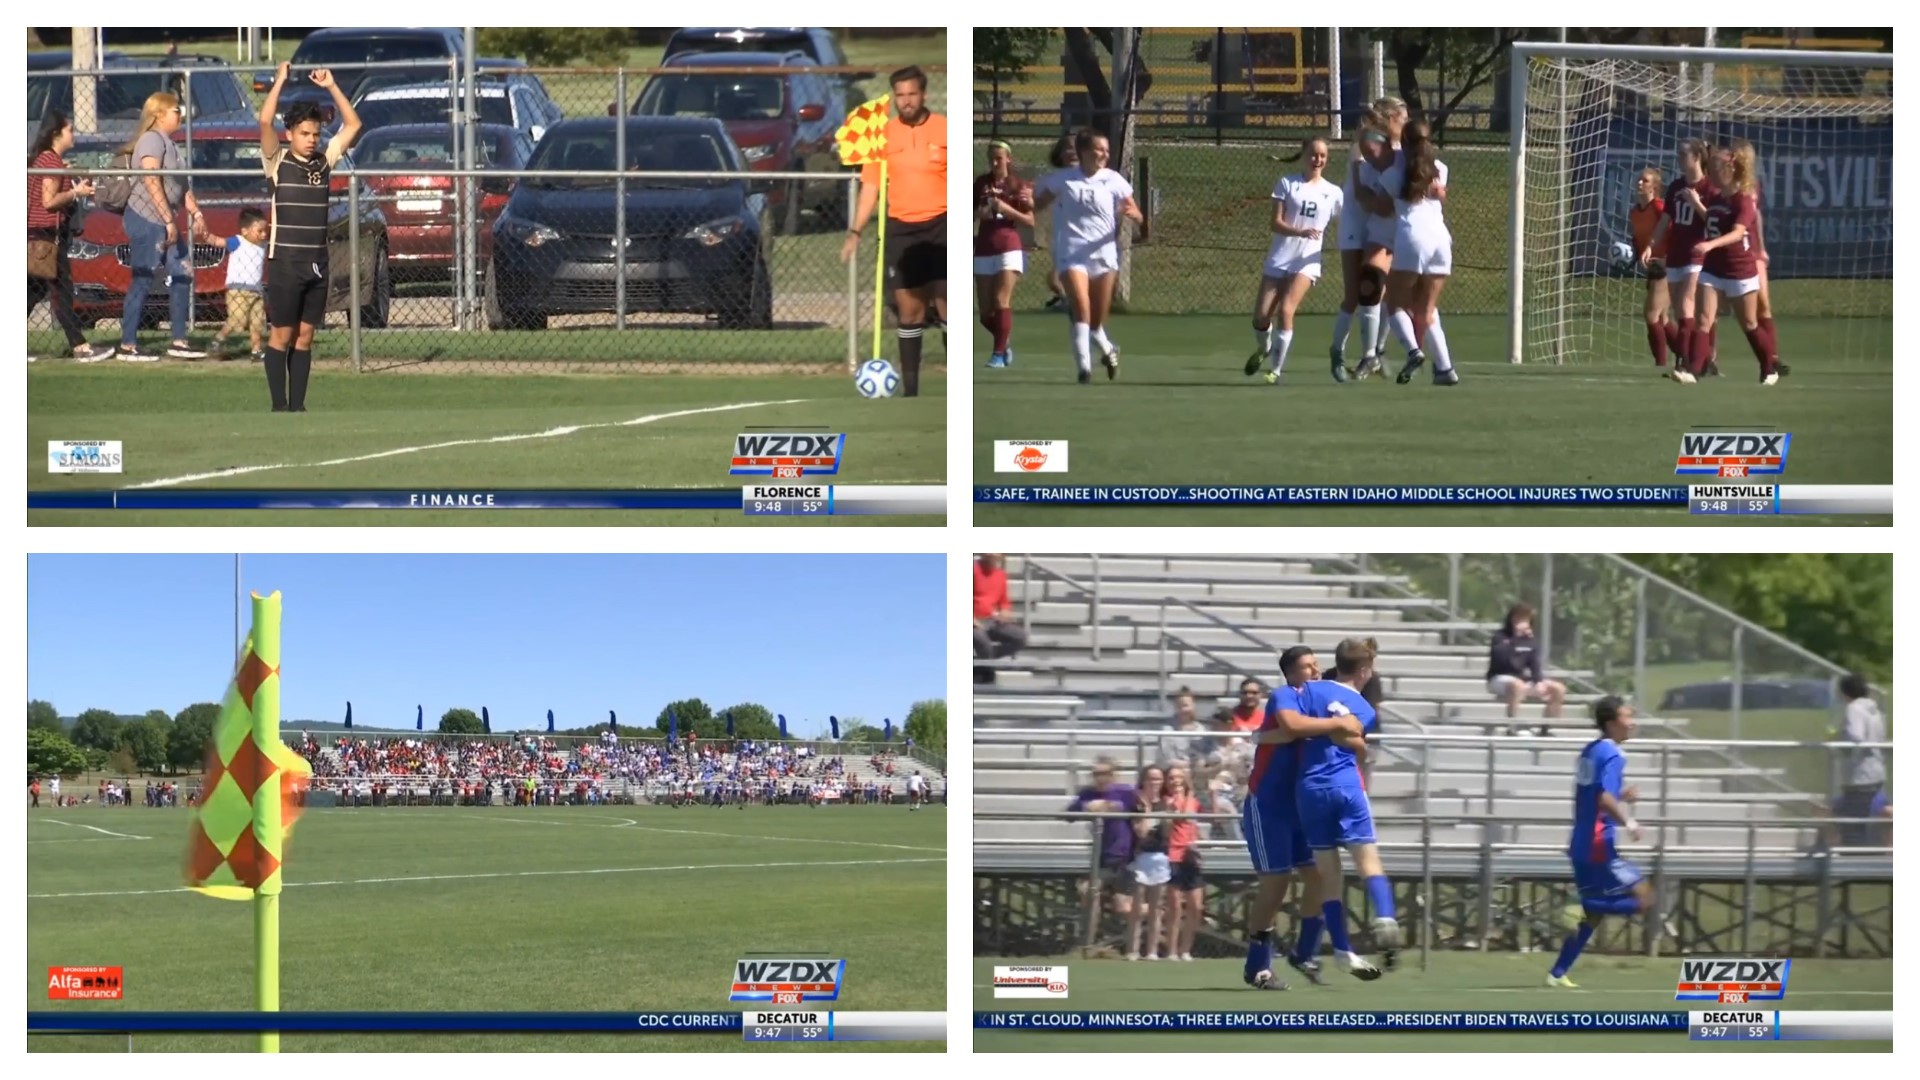 On Thursday, five Tenn. Valley area high school soccer teams had an opportunity to advance to the finals of the AHSAA State Soccer Championship at John Hunt Park